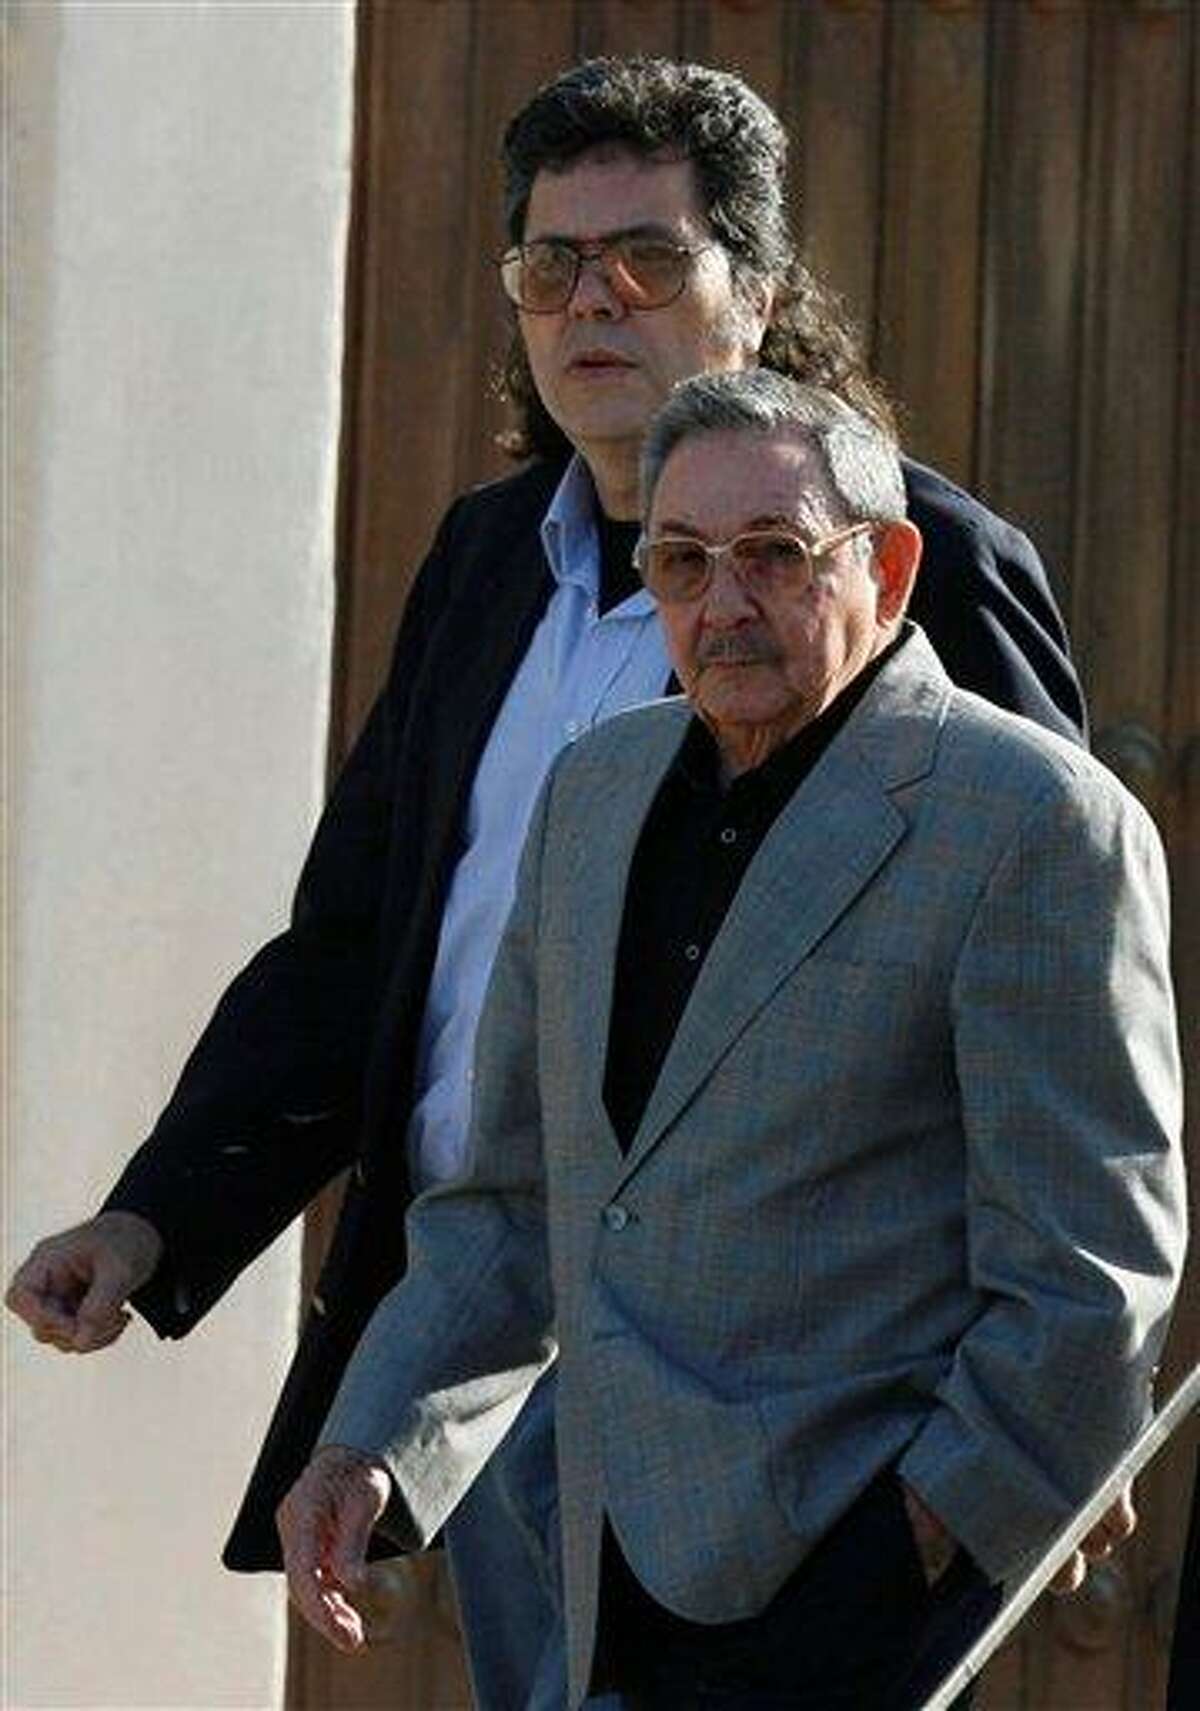 In this 2008 file photo, Cuba's President Raul Castro, right, and Minister of Culture Abel Prieto arrive at the opening ceremony of the International Book Fair in Havana, Cuba. Associated Press